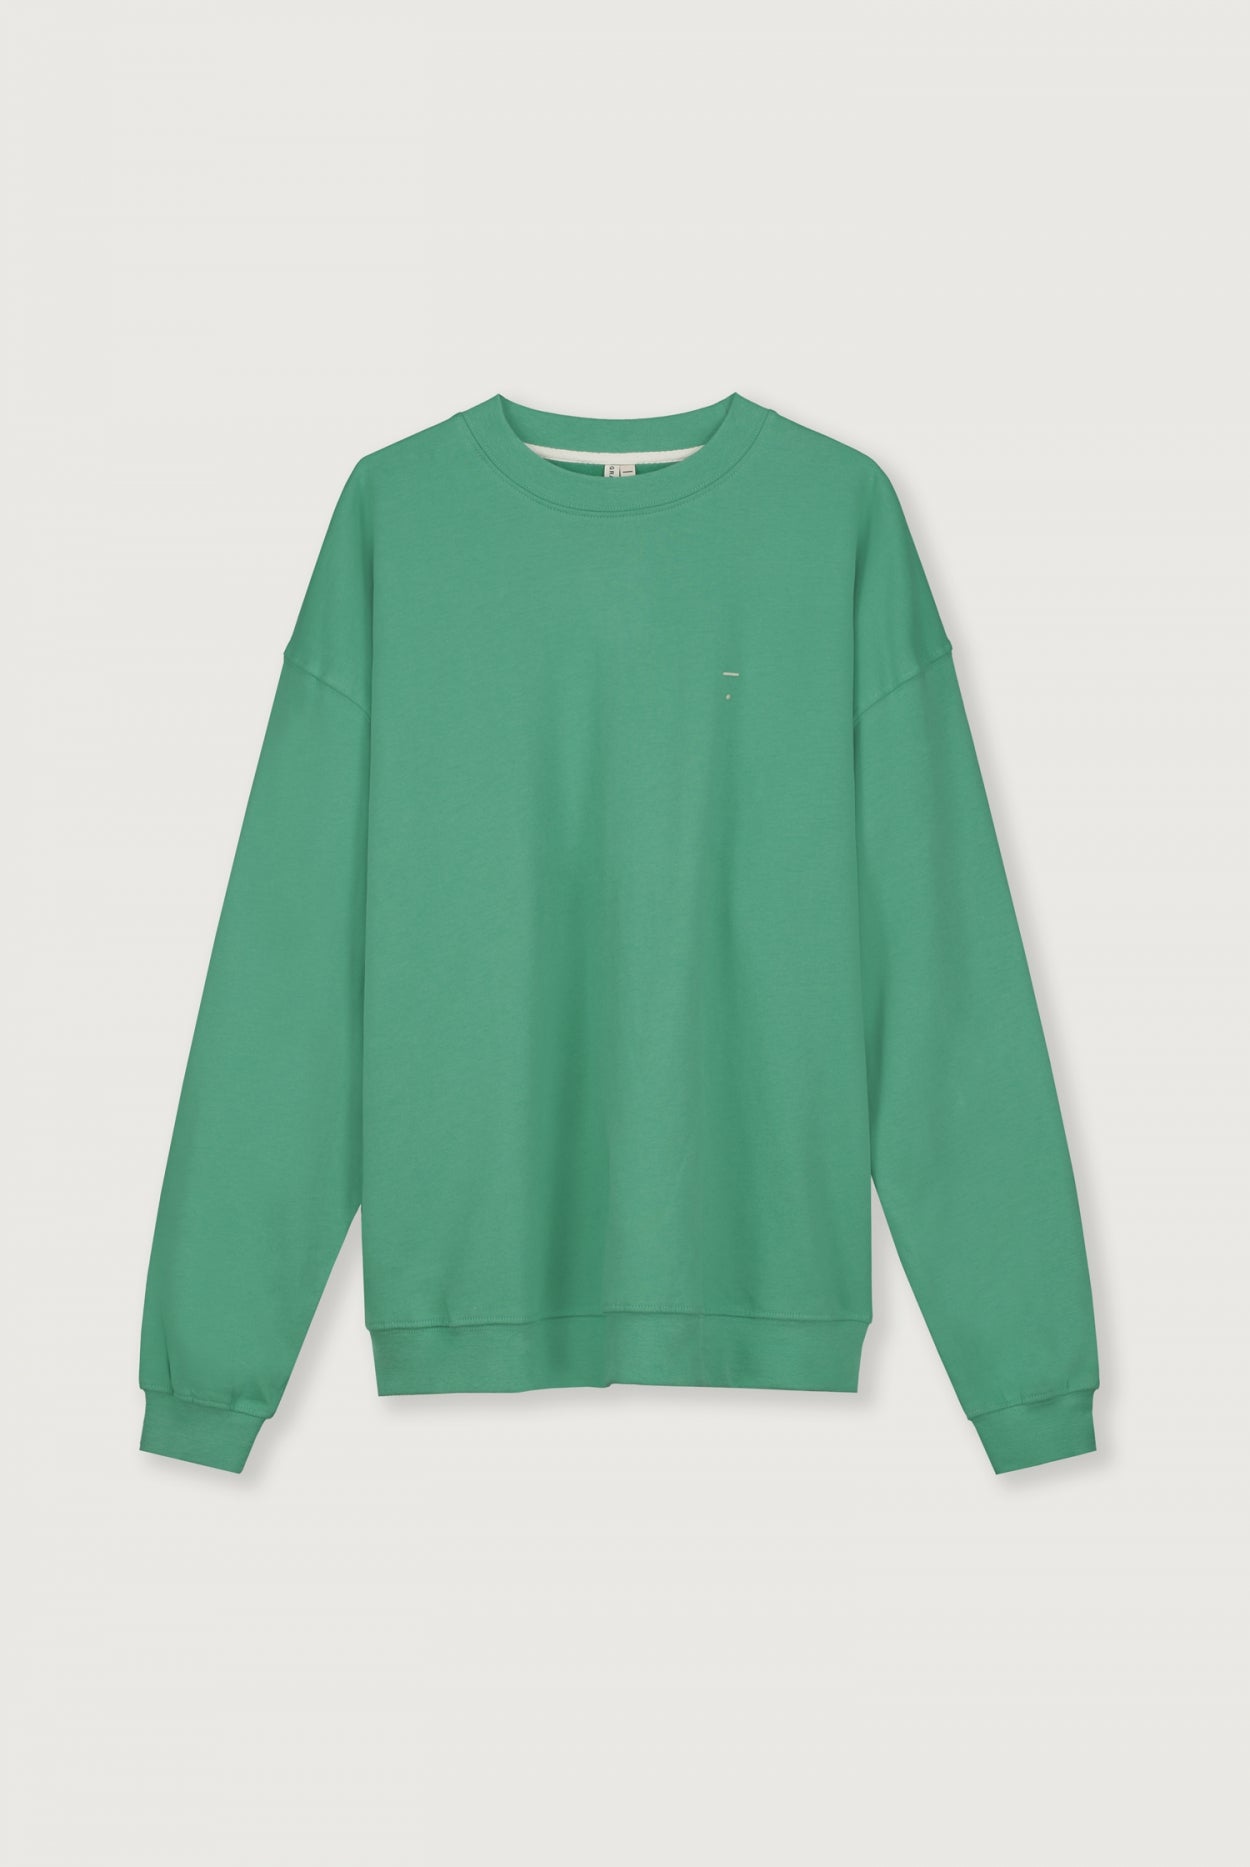 Adult Dropped Shoulder Sweater | Bright Green